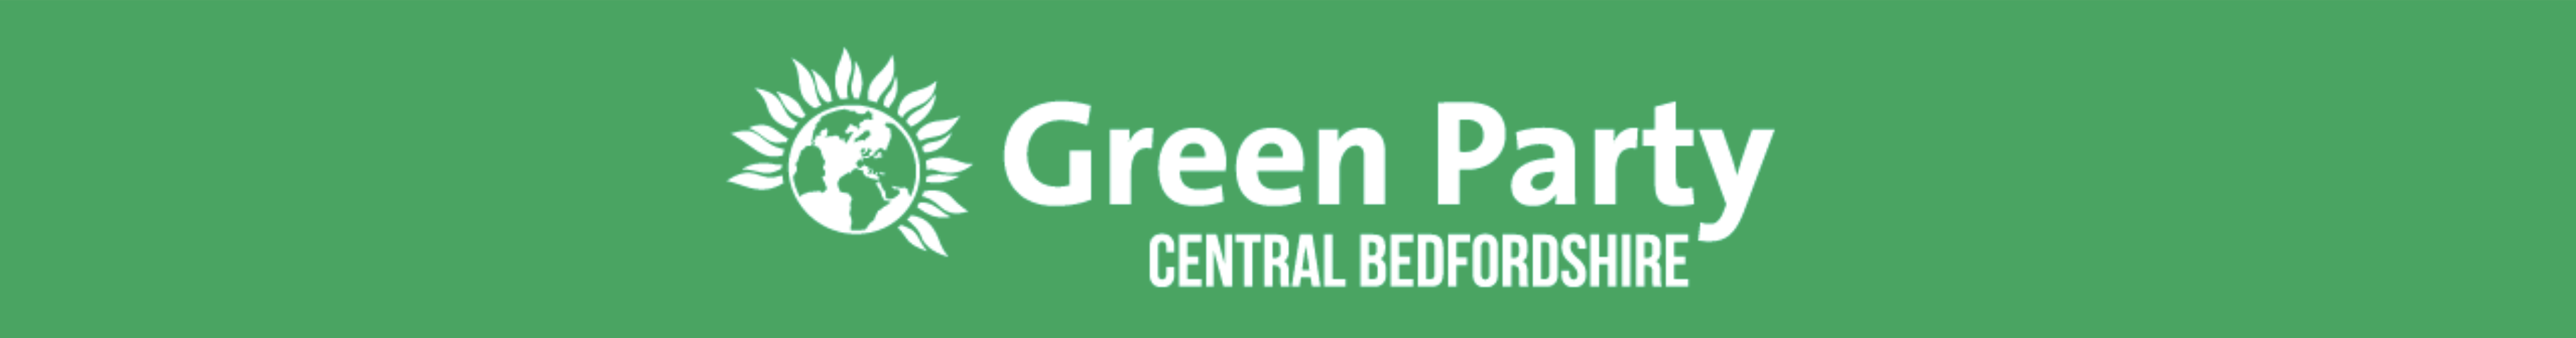 Central Bedfordshire Green Party Banner with World and petals logo